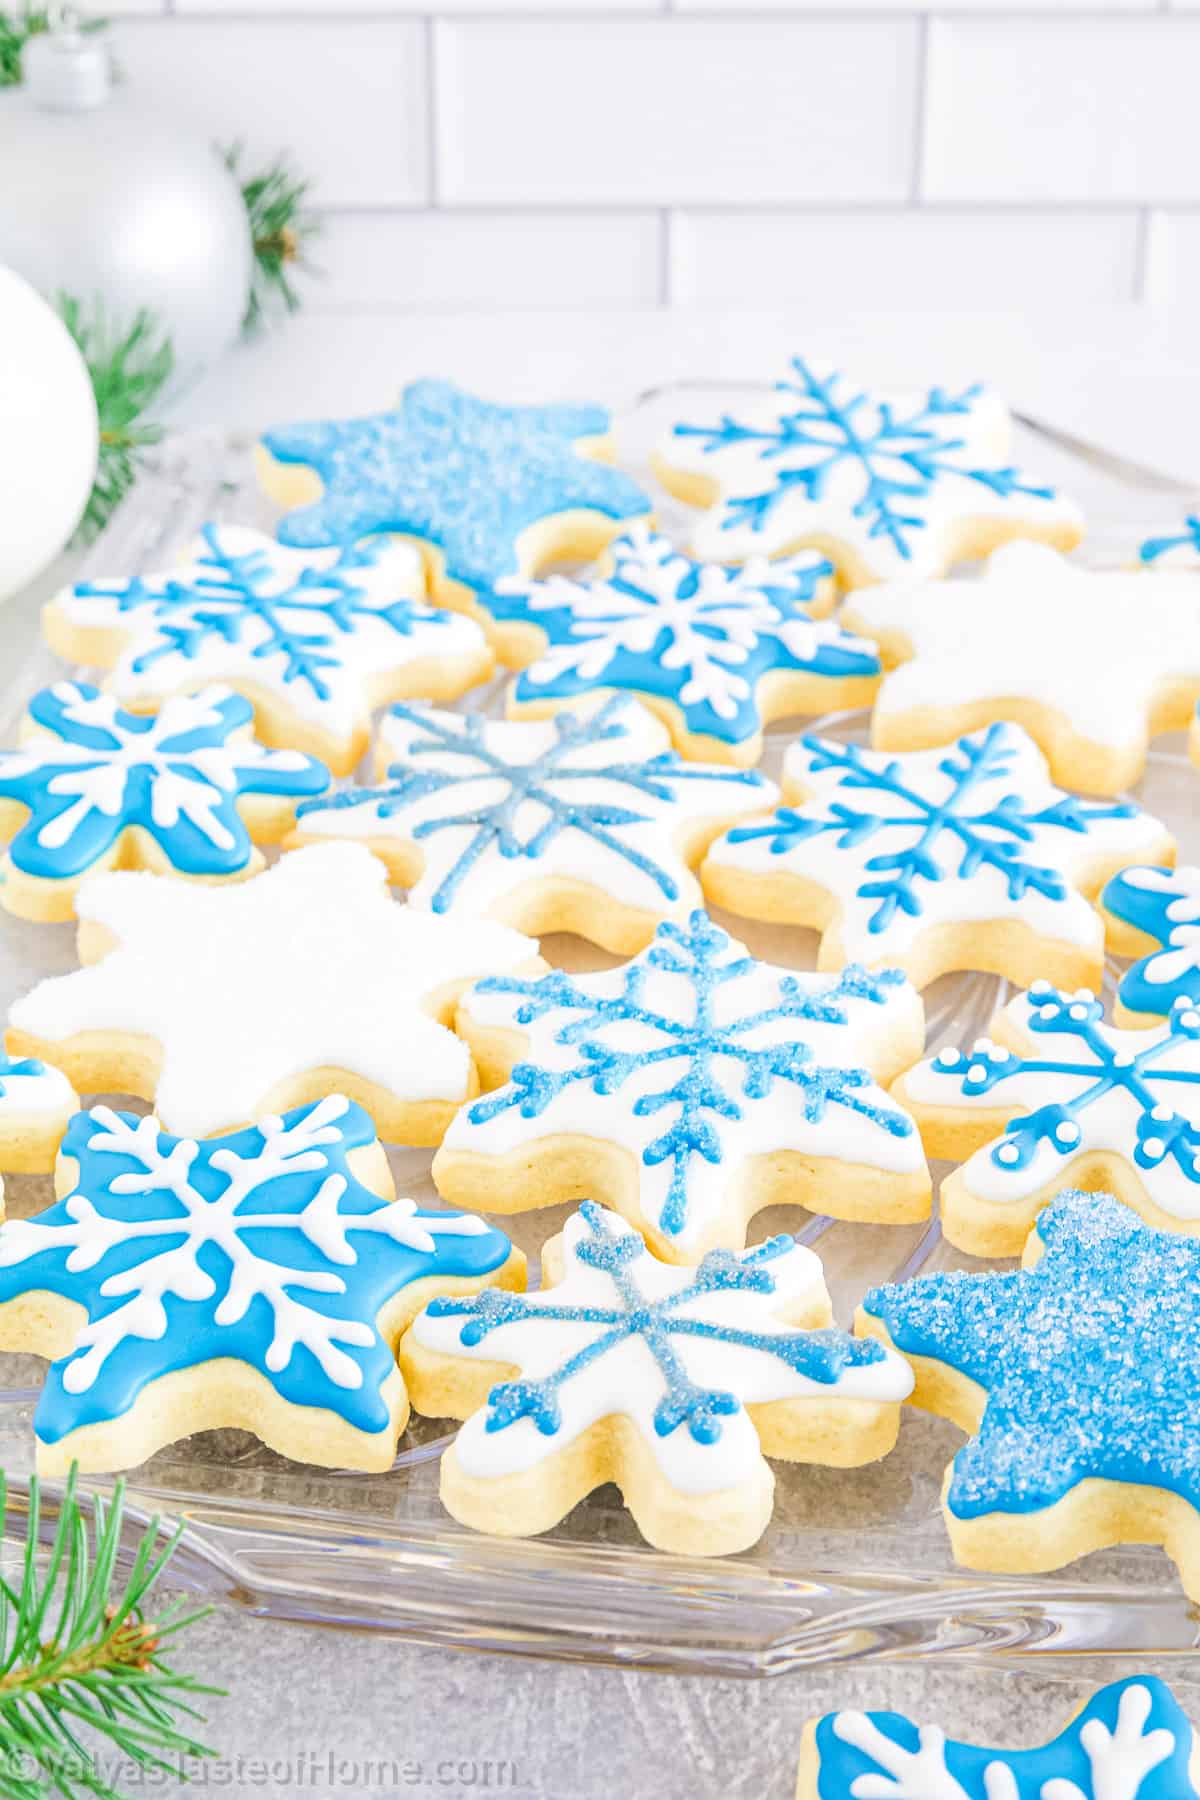 Snowflake cookies with royal icing are a delicious mix of sweet, buttery goodness, and a crisp texture, all topped with a layer of glossy royal icing.